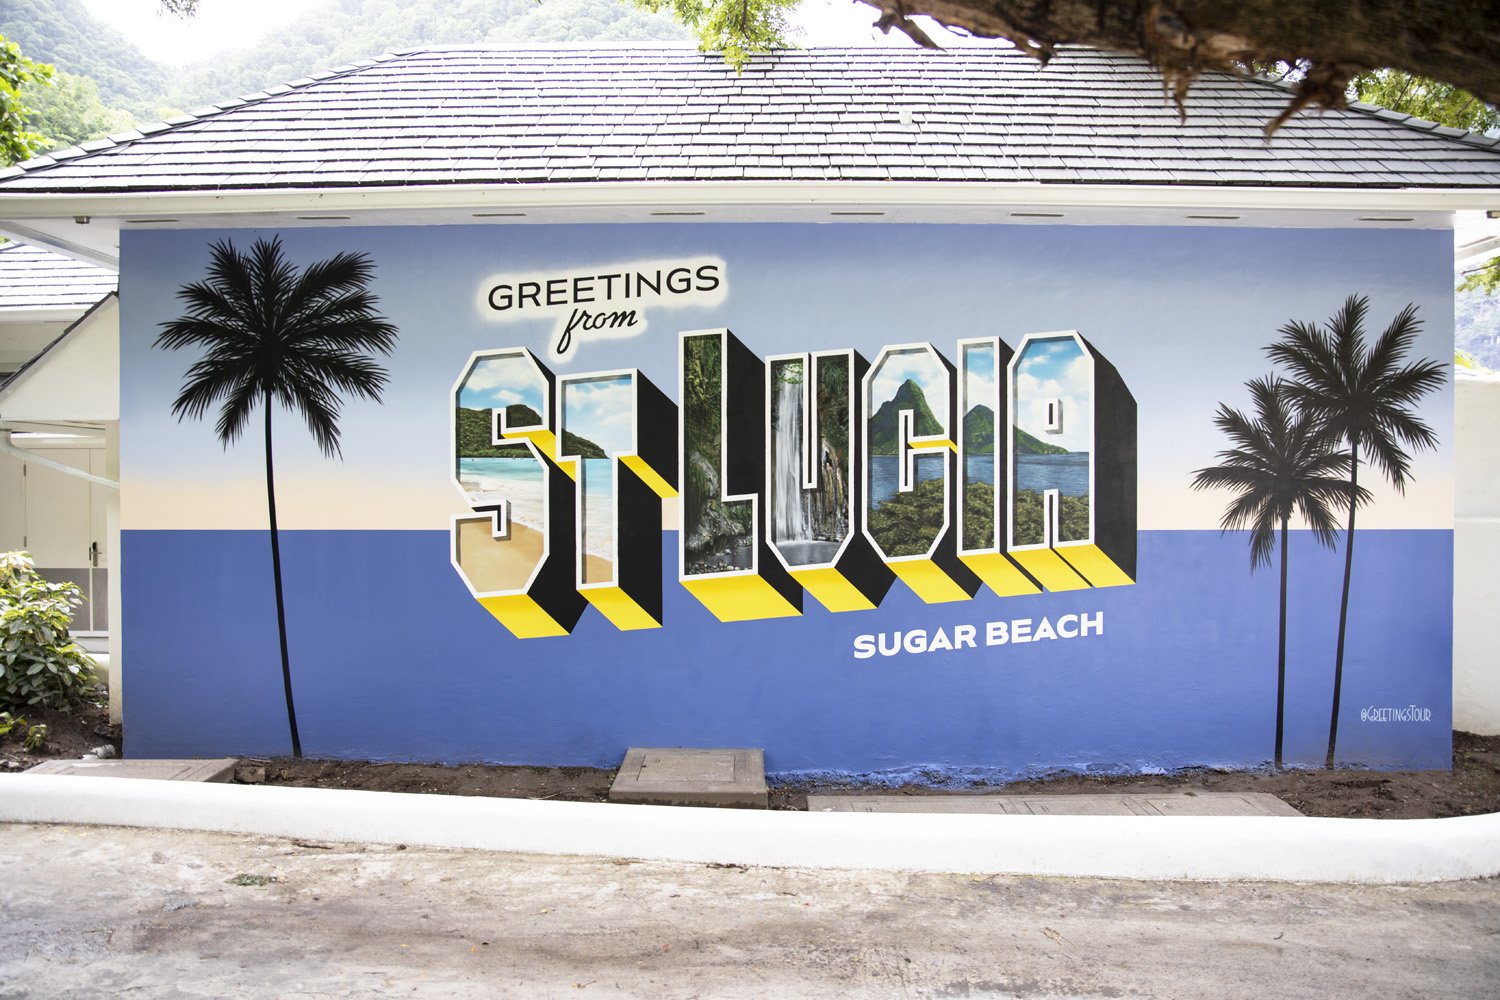 Greetings from St. Lucia Mural